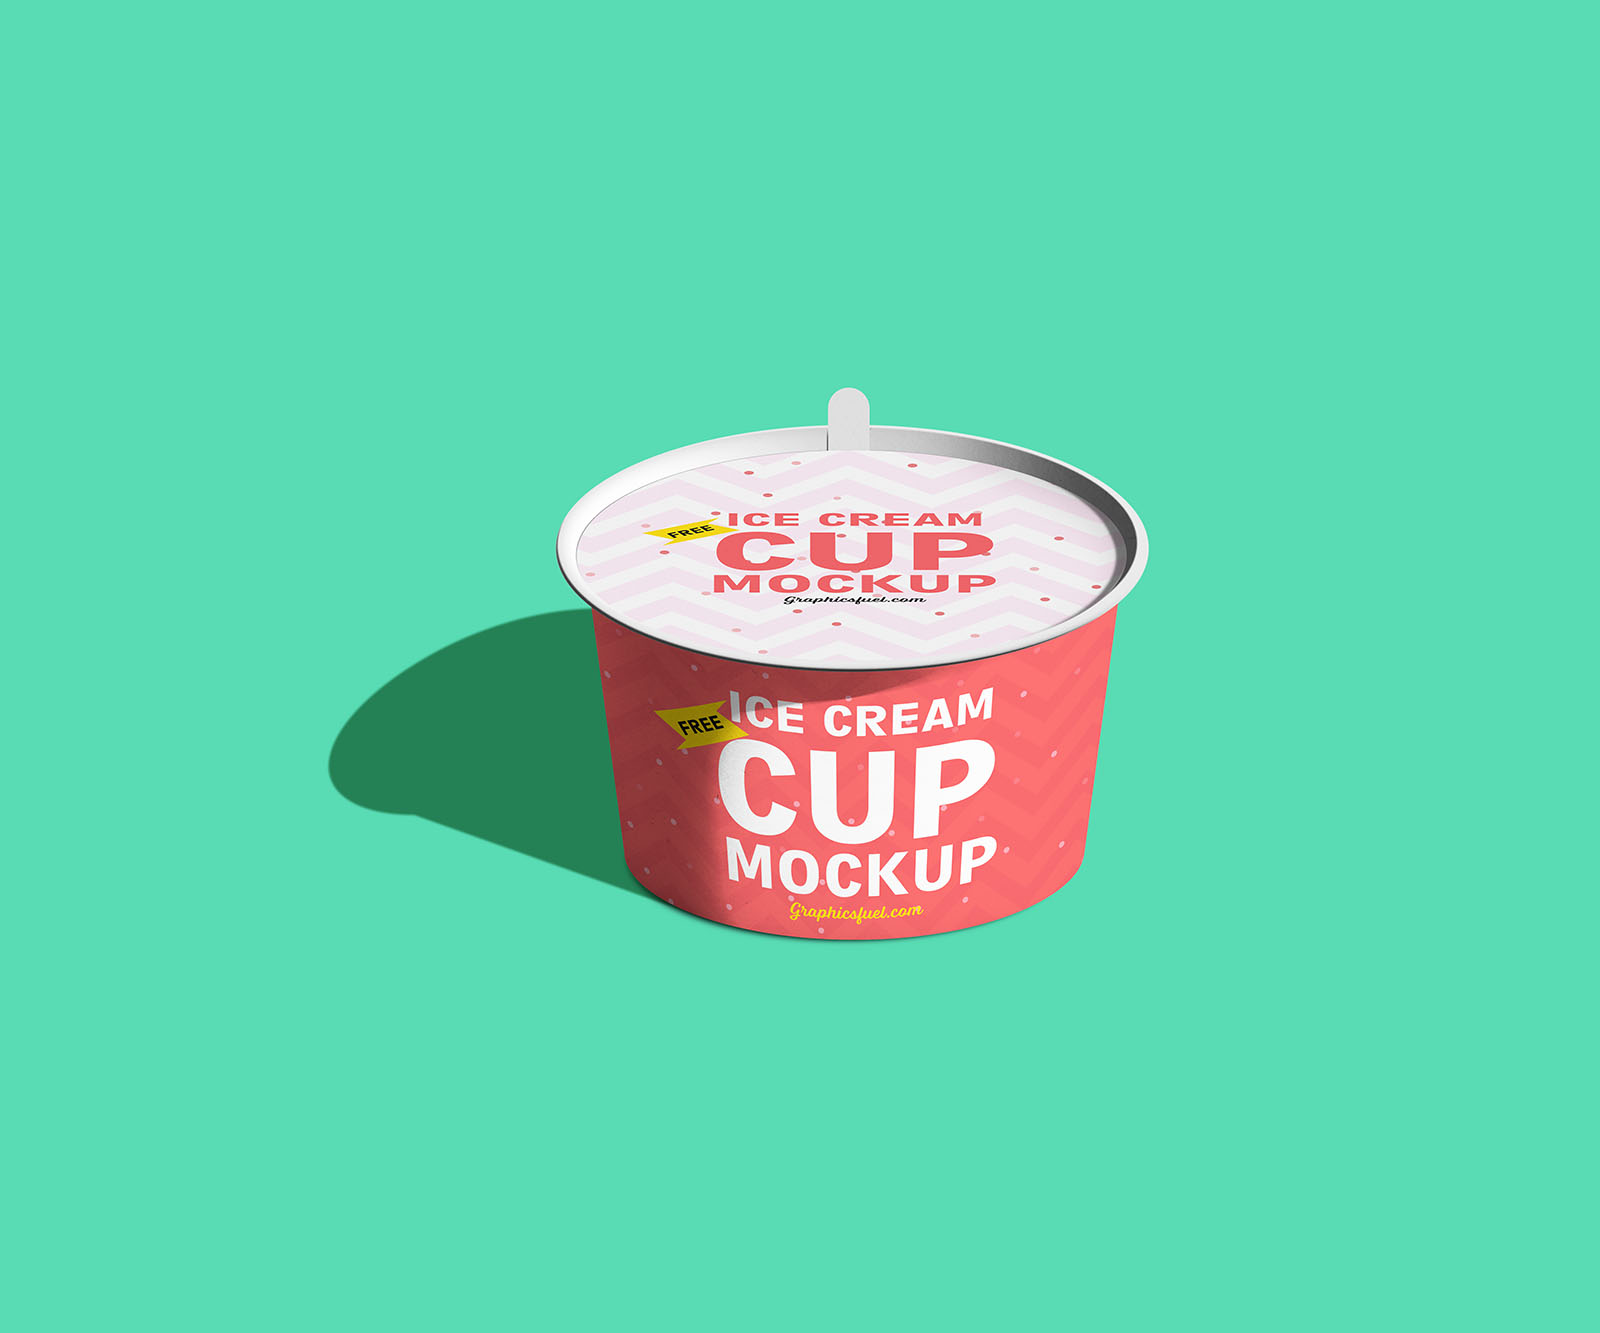 https://www.graphicsfuel.com/wp-content/uploads/2021/11/Ice-Cream-Cup-Mockup-Template.jpg